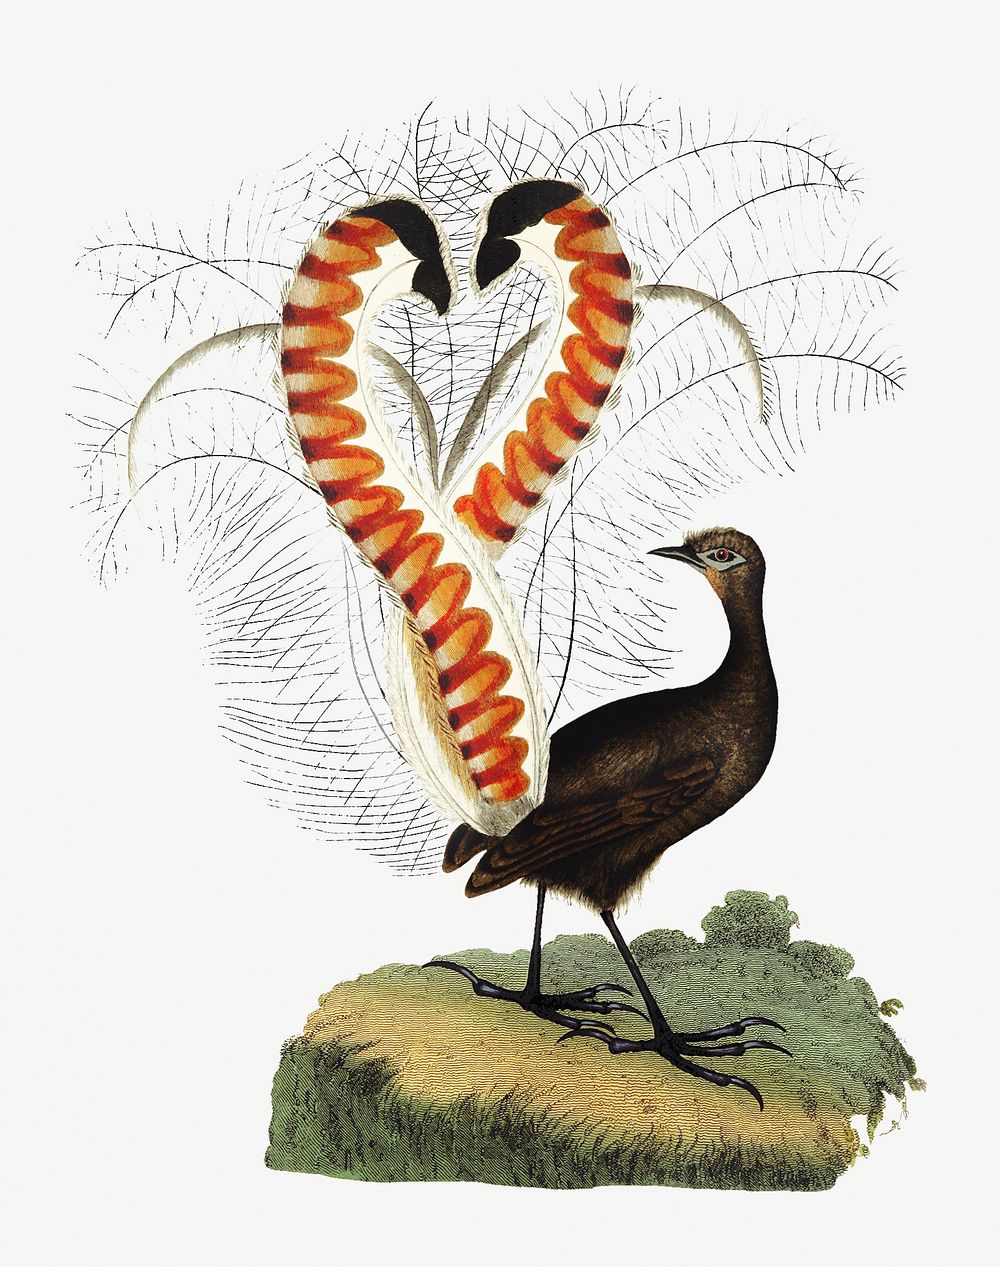 Lyrebird from An Account of the English Colony in New South Wales (1804) published by David Collins. Original from the…